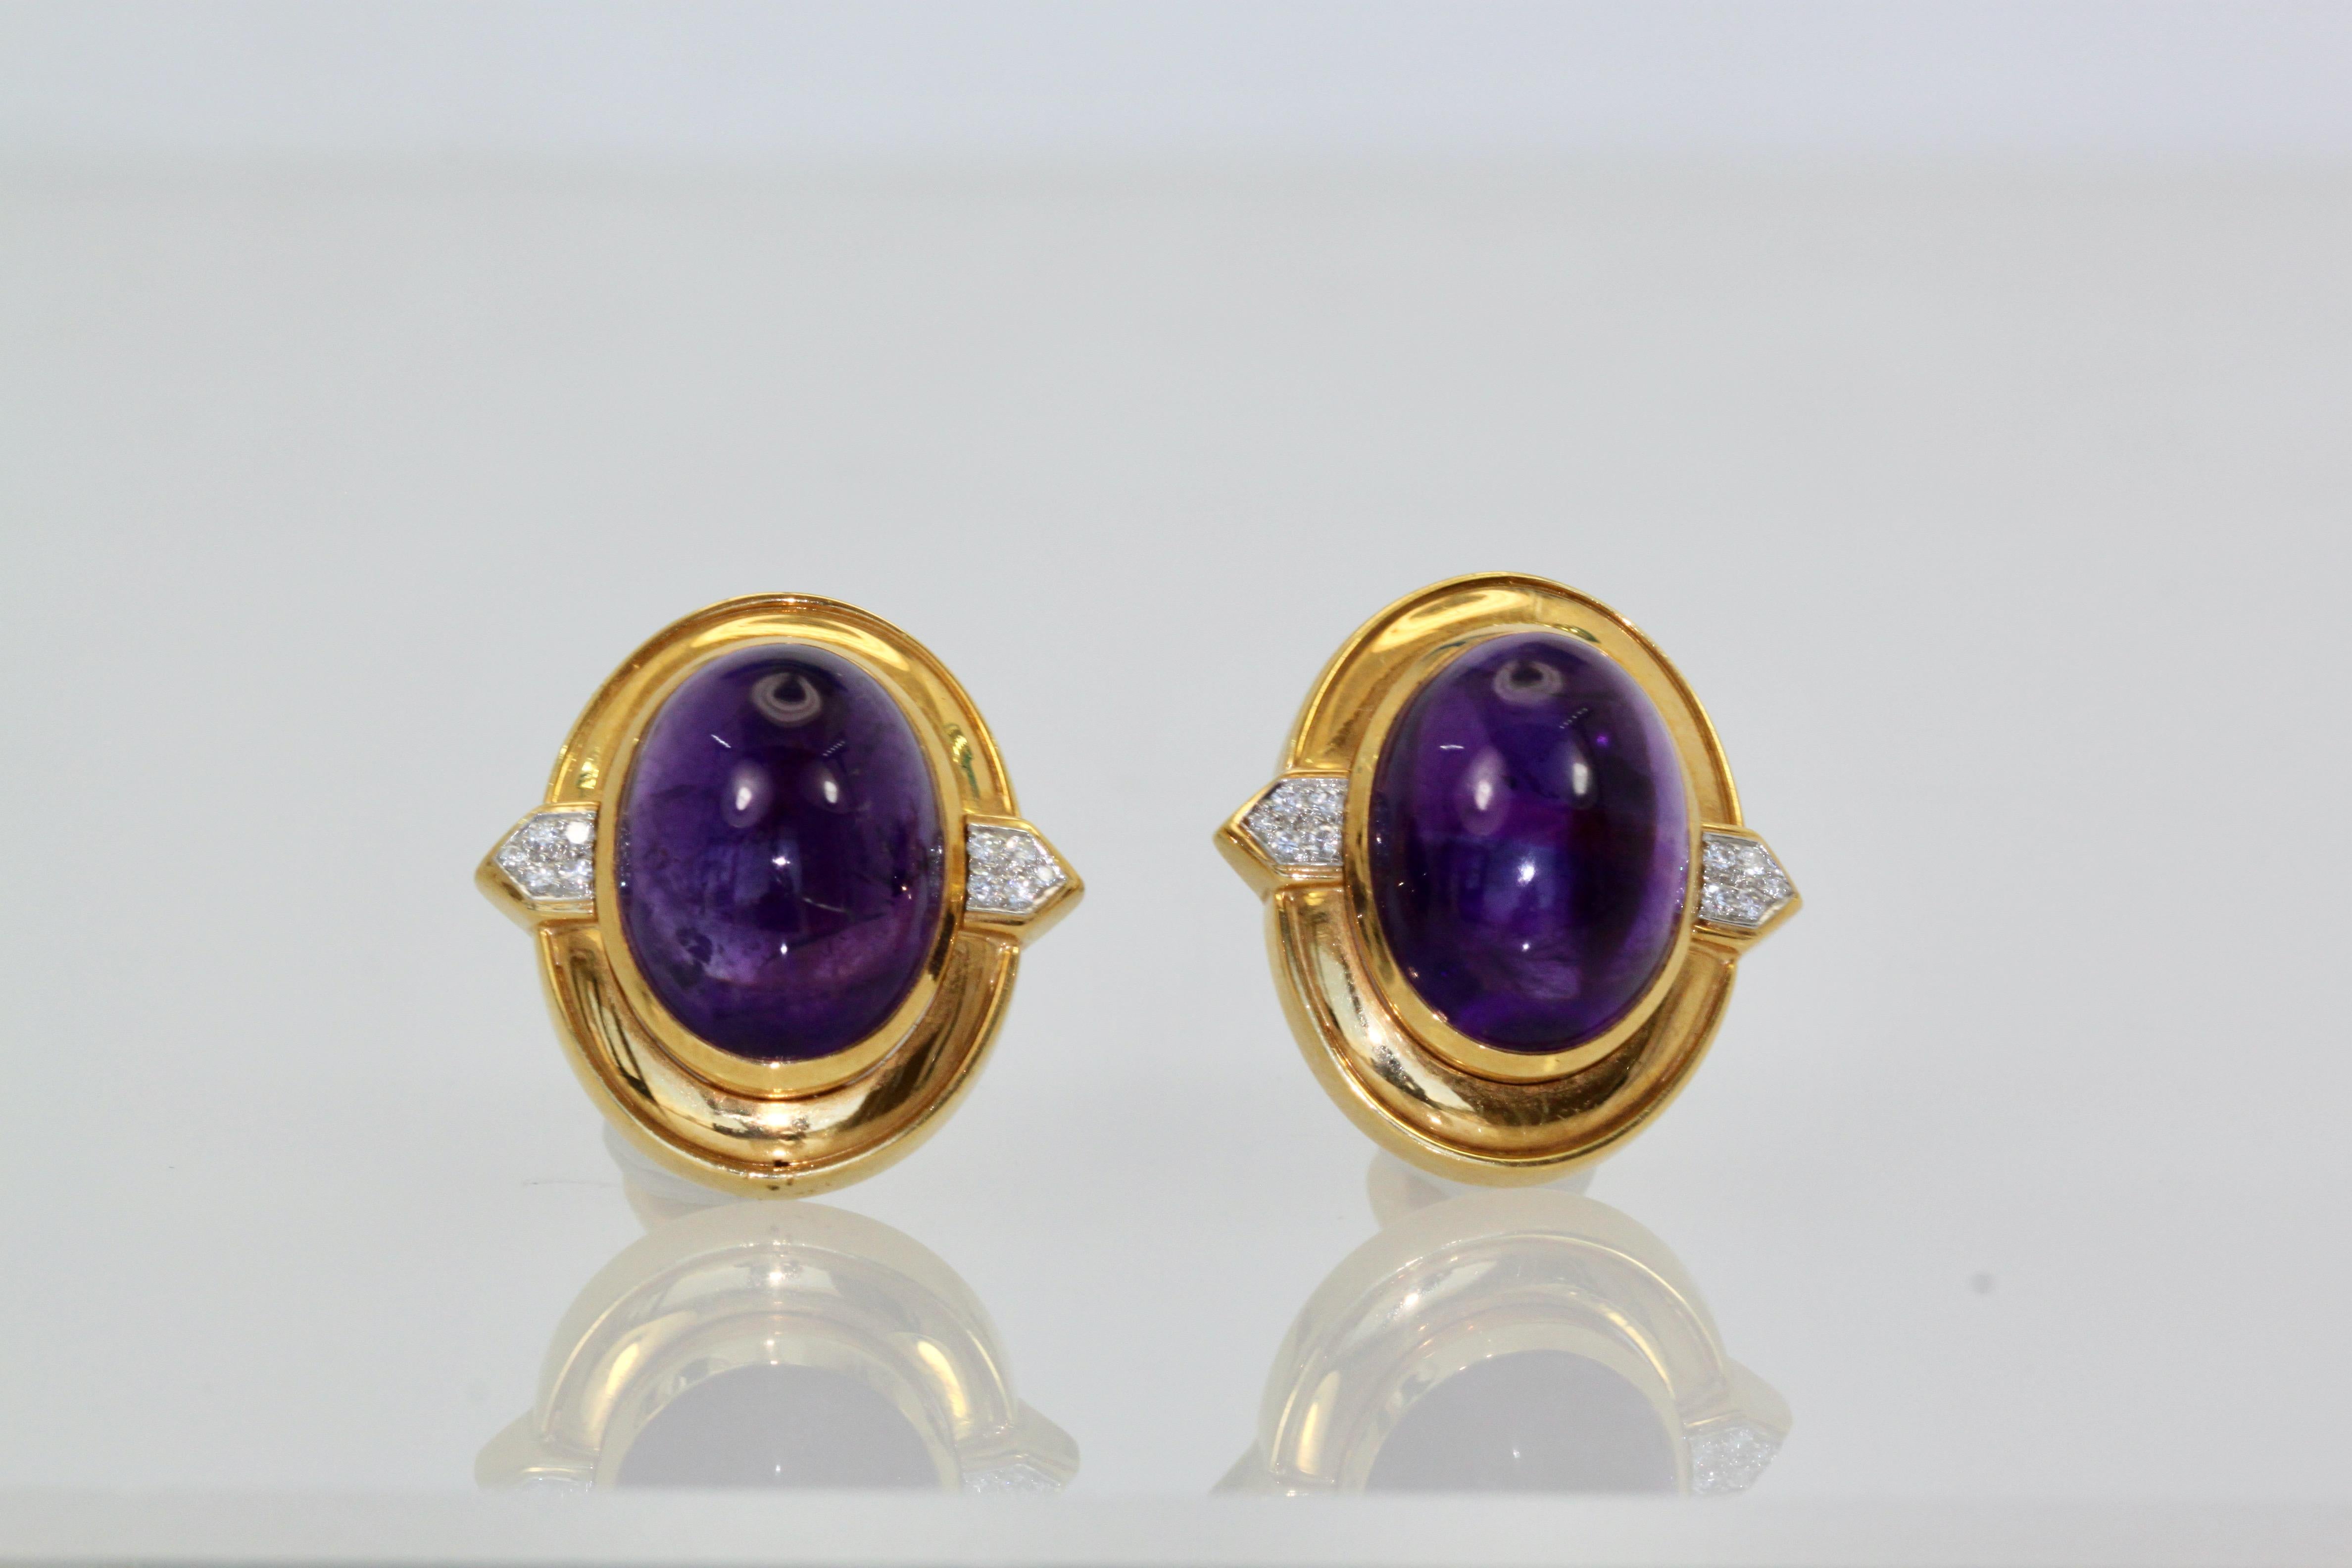 These beautiful David Webb earrings feature Amethyst Cabochons that measure 20.71 cm x 16.5 cm.  They are quite large and the surround measures 23cm x 28cm with a depth of 11.40.  These stones are surrounded by 18K Yellow Gold with two side plaques